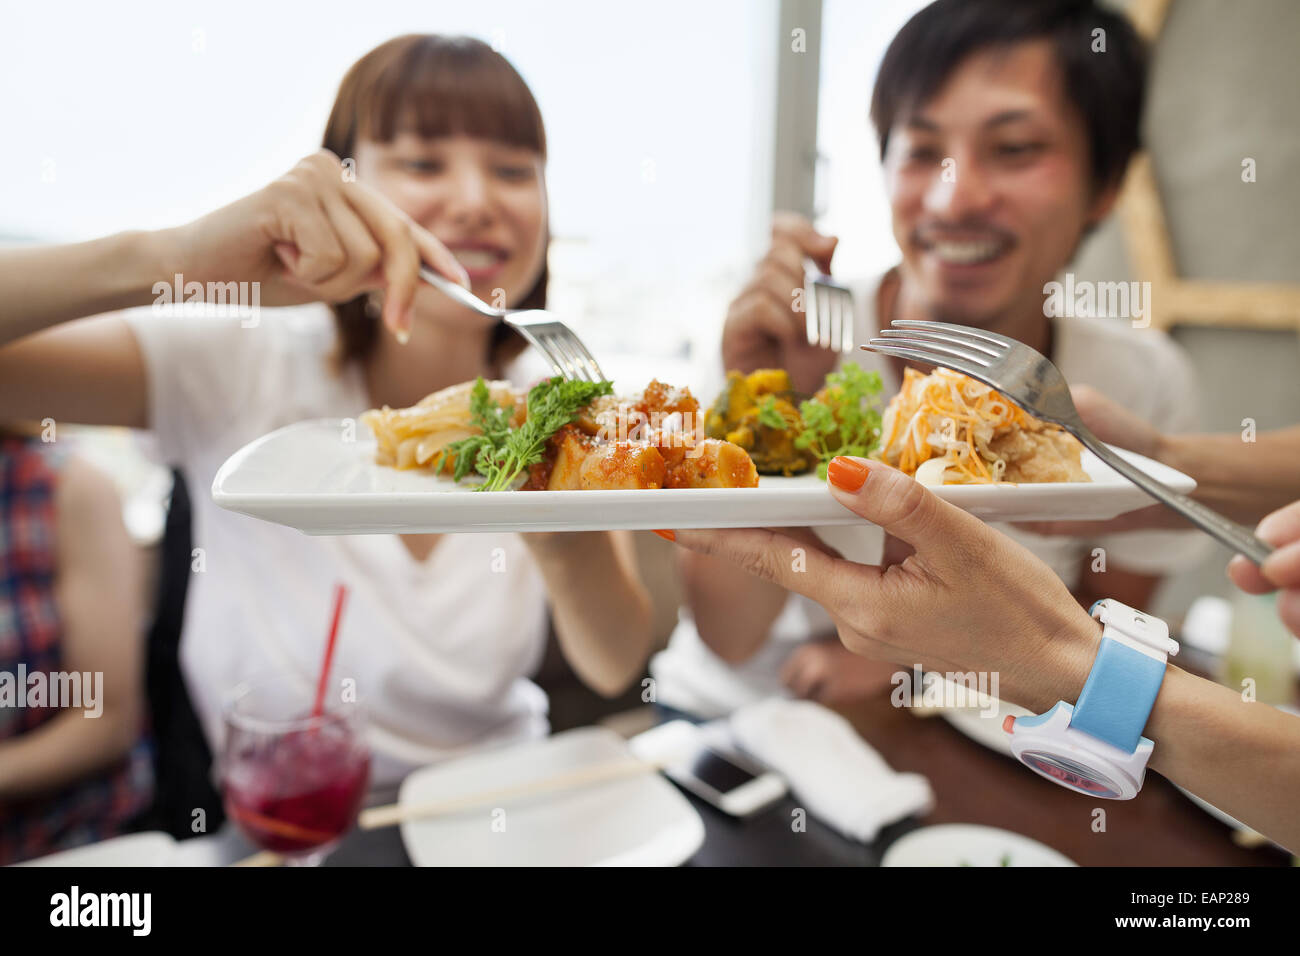 Group of friends sharing a meal. Stock Photo